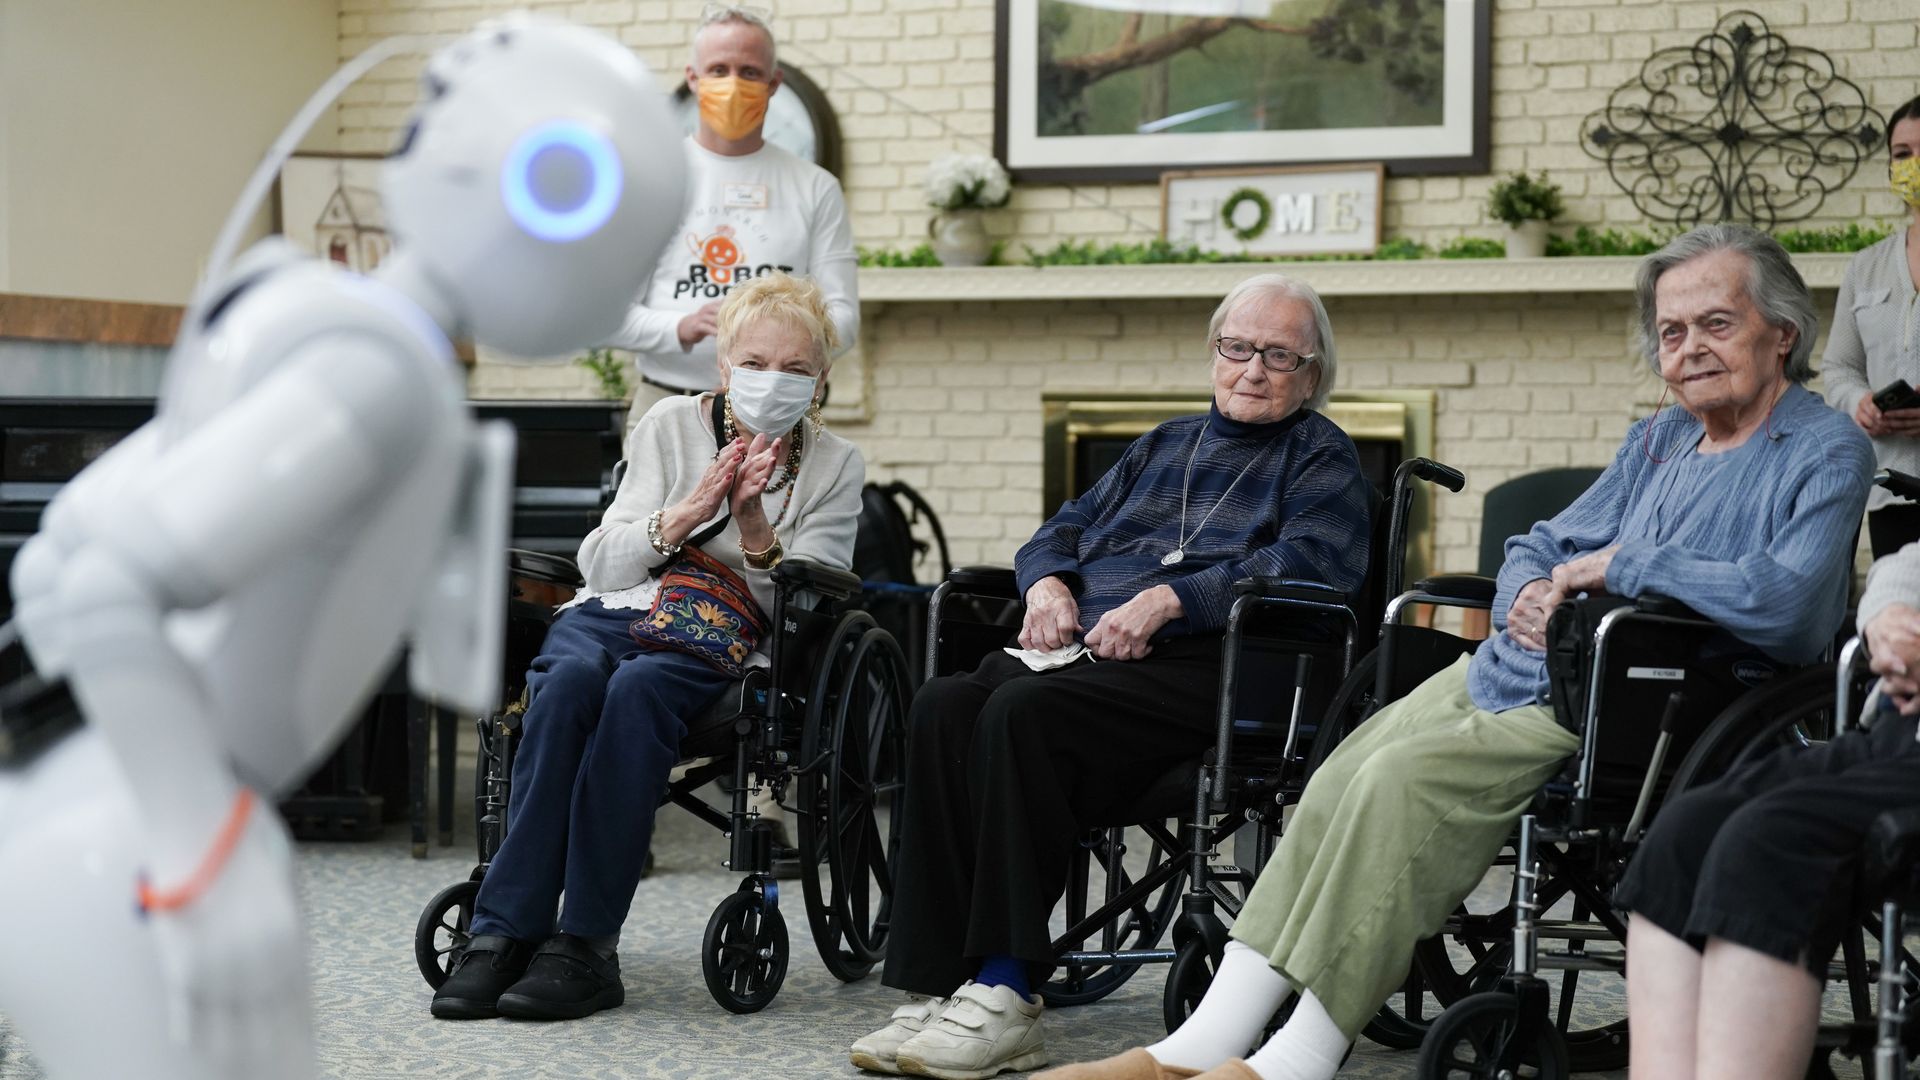 A humanoid robot entertains residents of a nursing home.